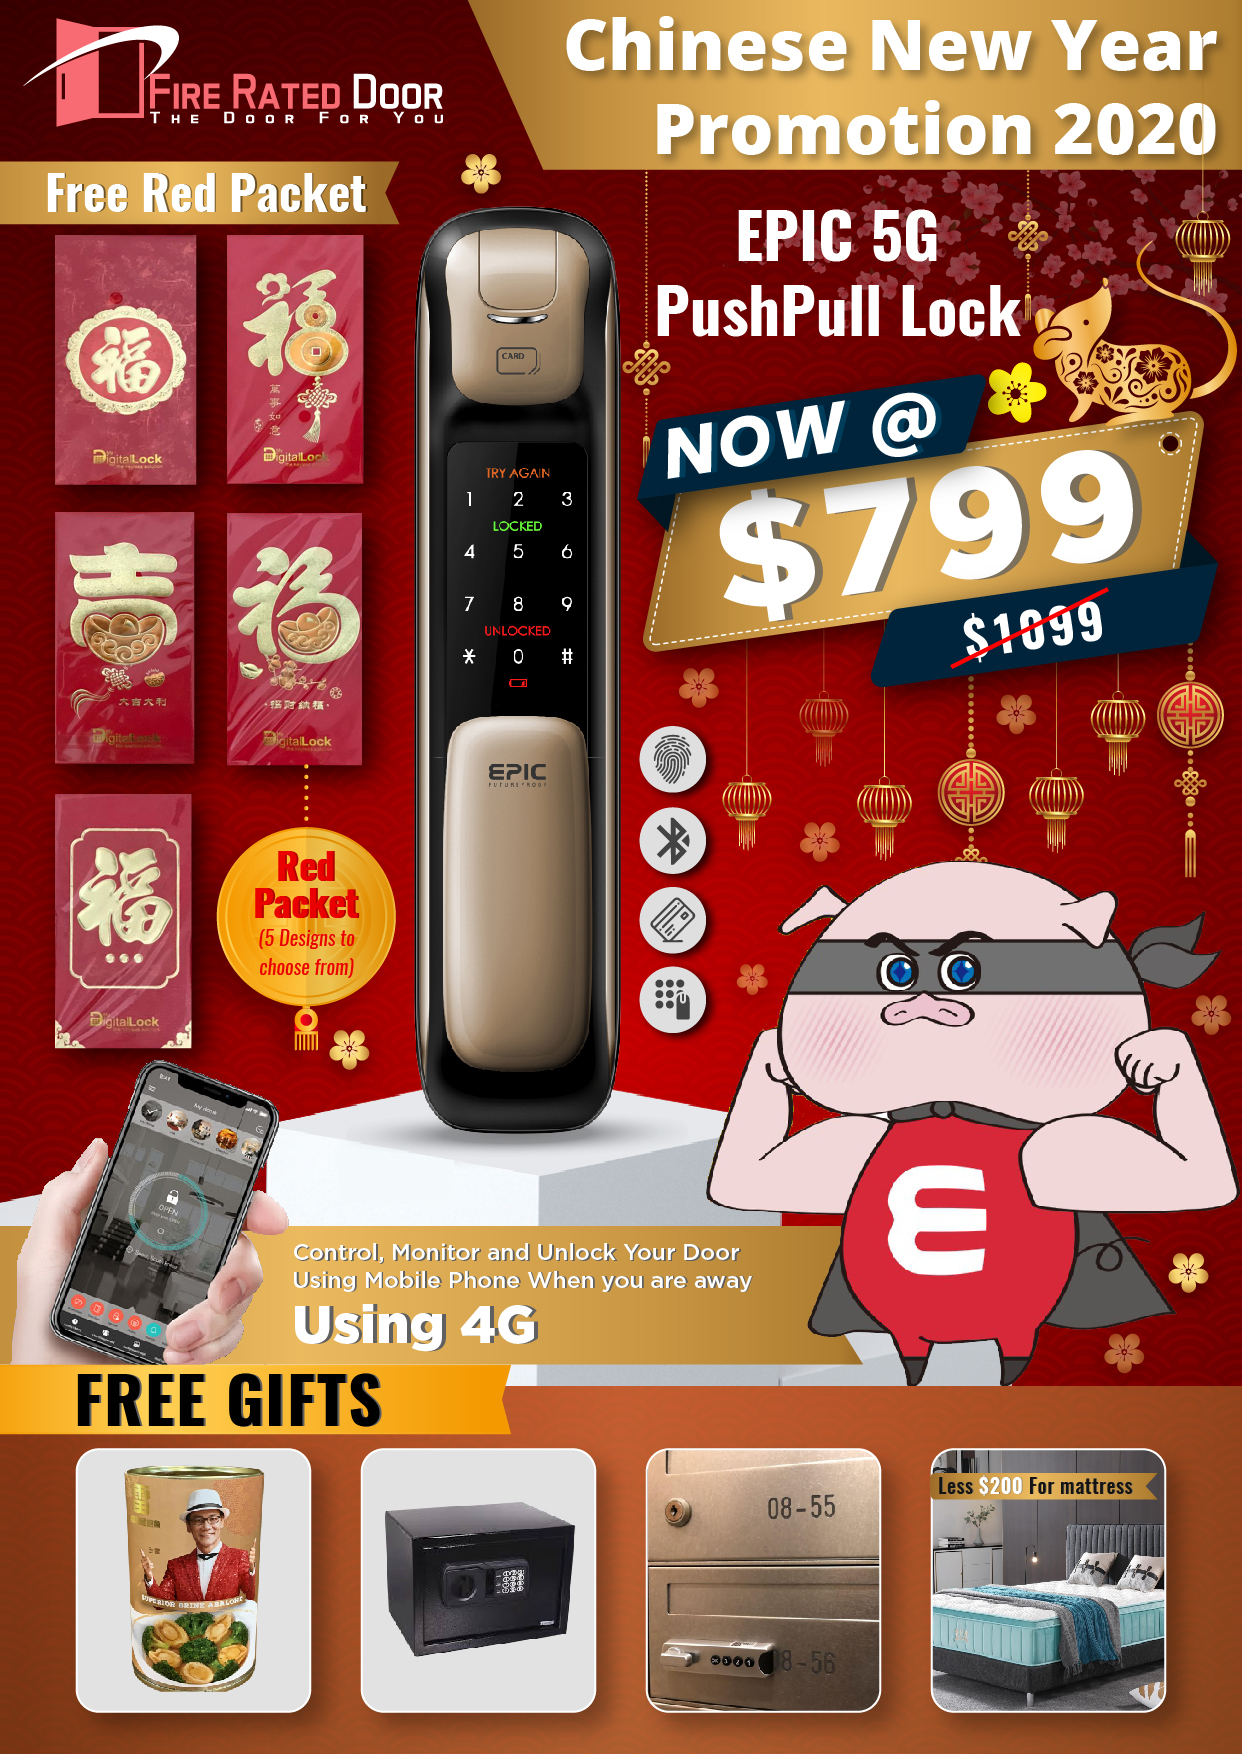 CHINESE NEW YEAR PROMOTIONS FROM FIRE RATED DOOR, GET EPIC 5G PUSHPULL LOCK FOR $799 AND GET ABALONE